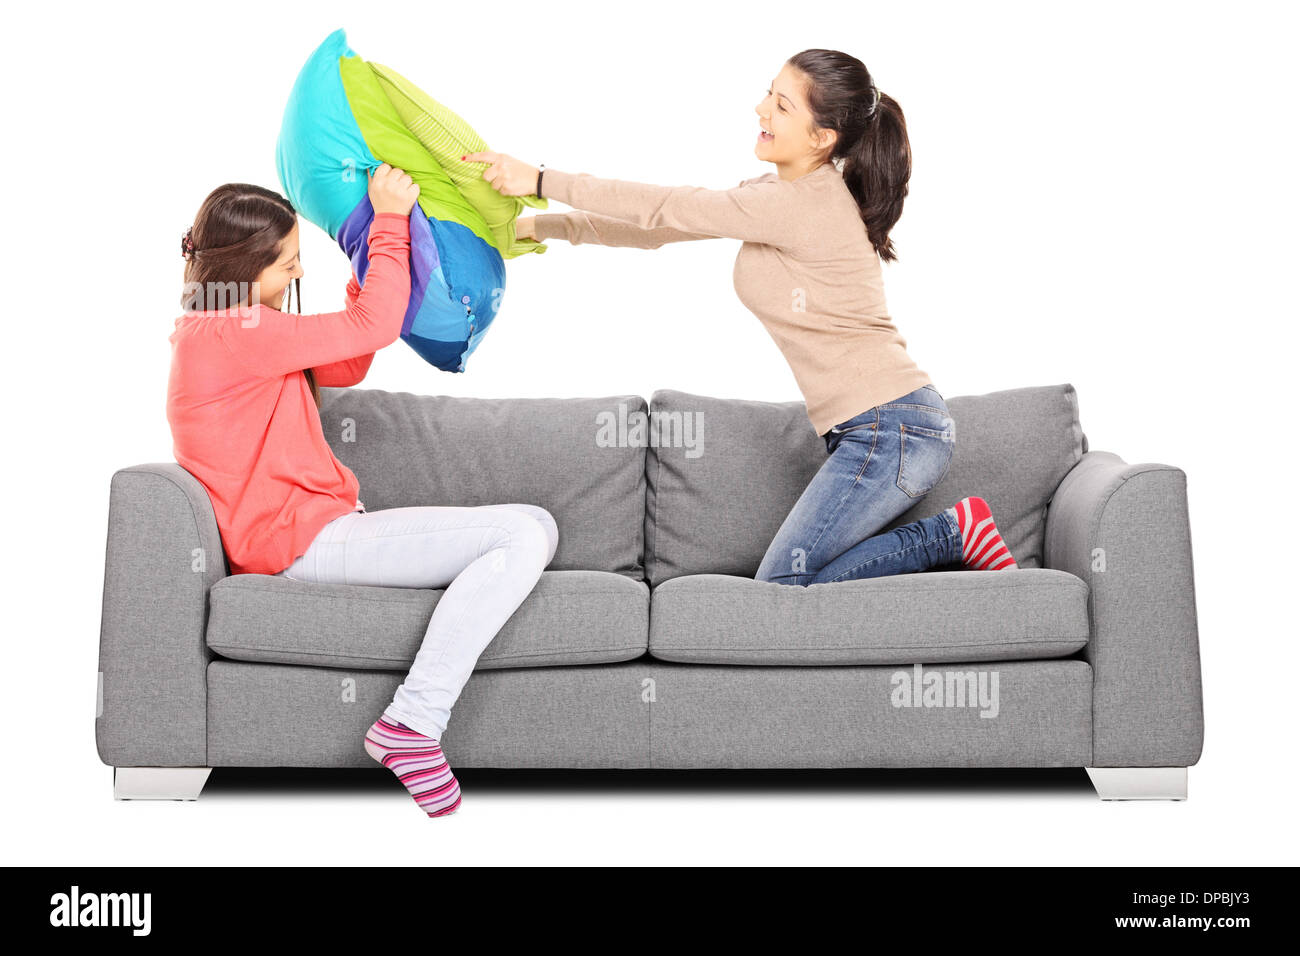 Two young girls having a pillow fight seated on sofa Stock Photo